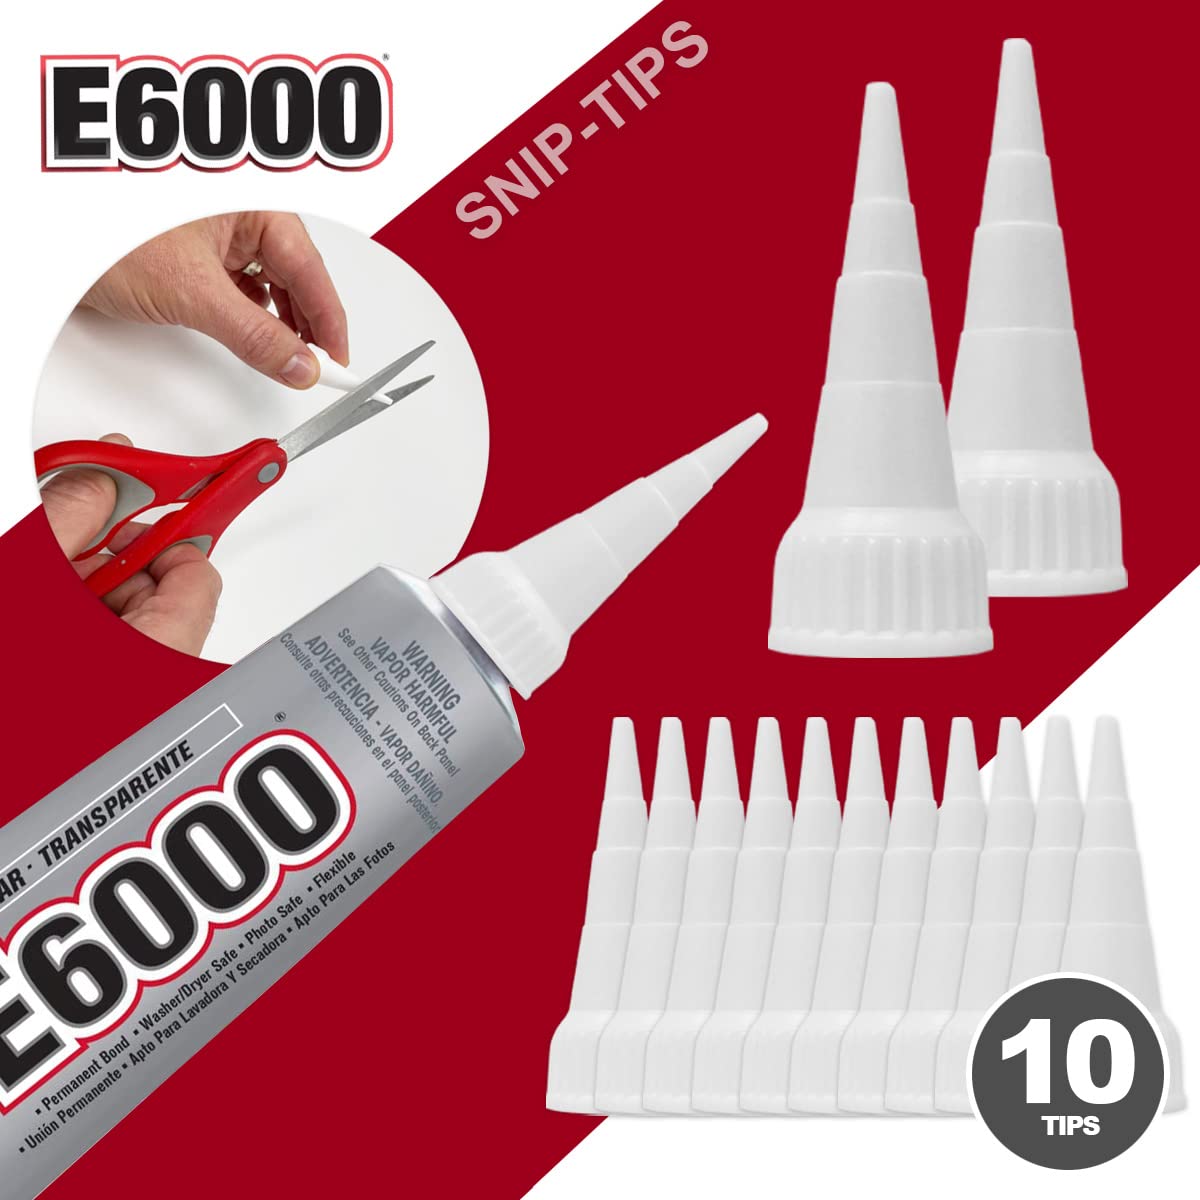 E6000 Jewelry and Bead Adhesive Bundle: Includes 4 Precision Applicator  Tips and a Set of 5 Nail Dotting Tools - Double-Headed with Various Sizes  for